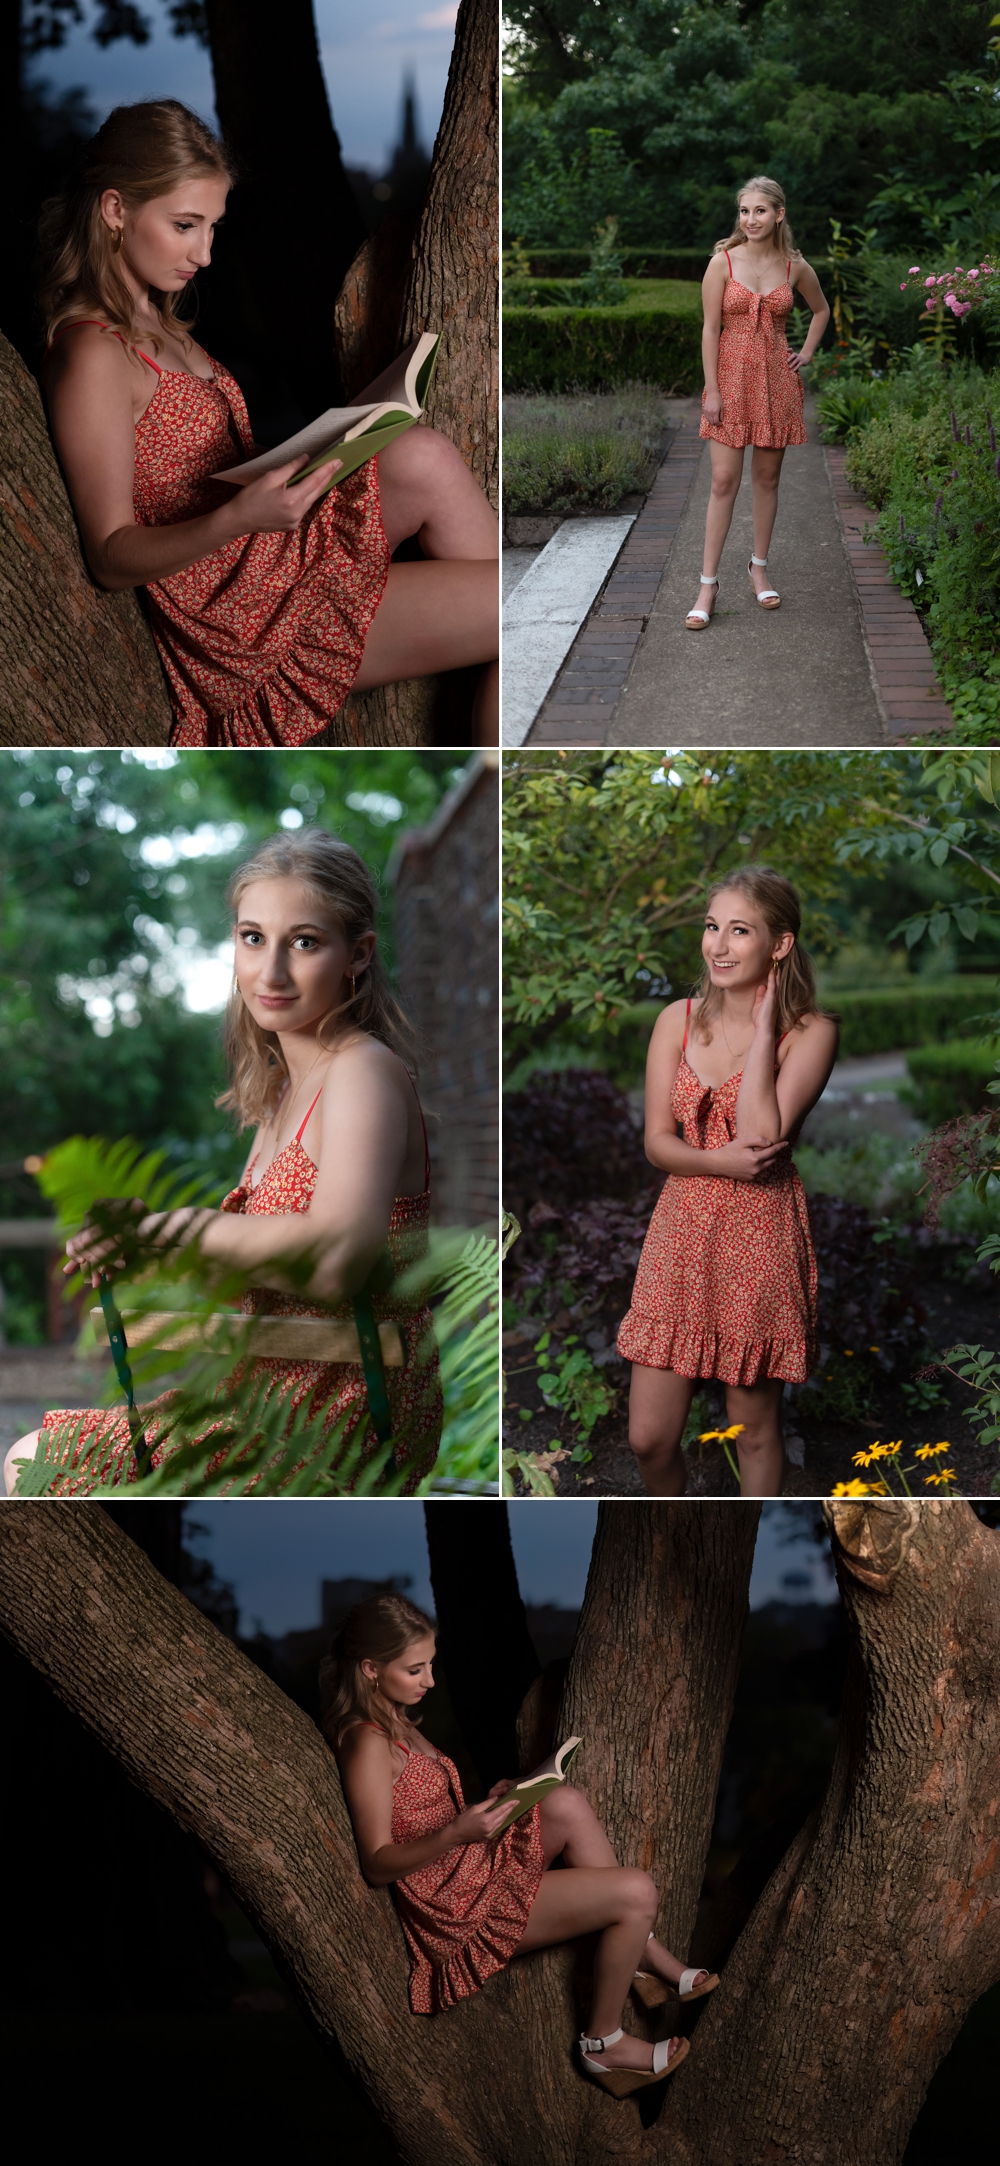 Teenage girl in red dress in park at dusk